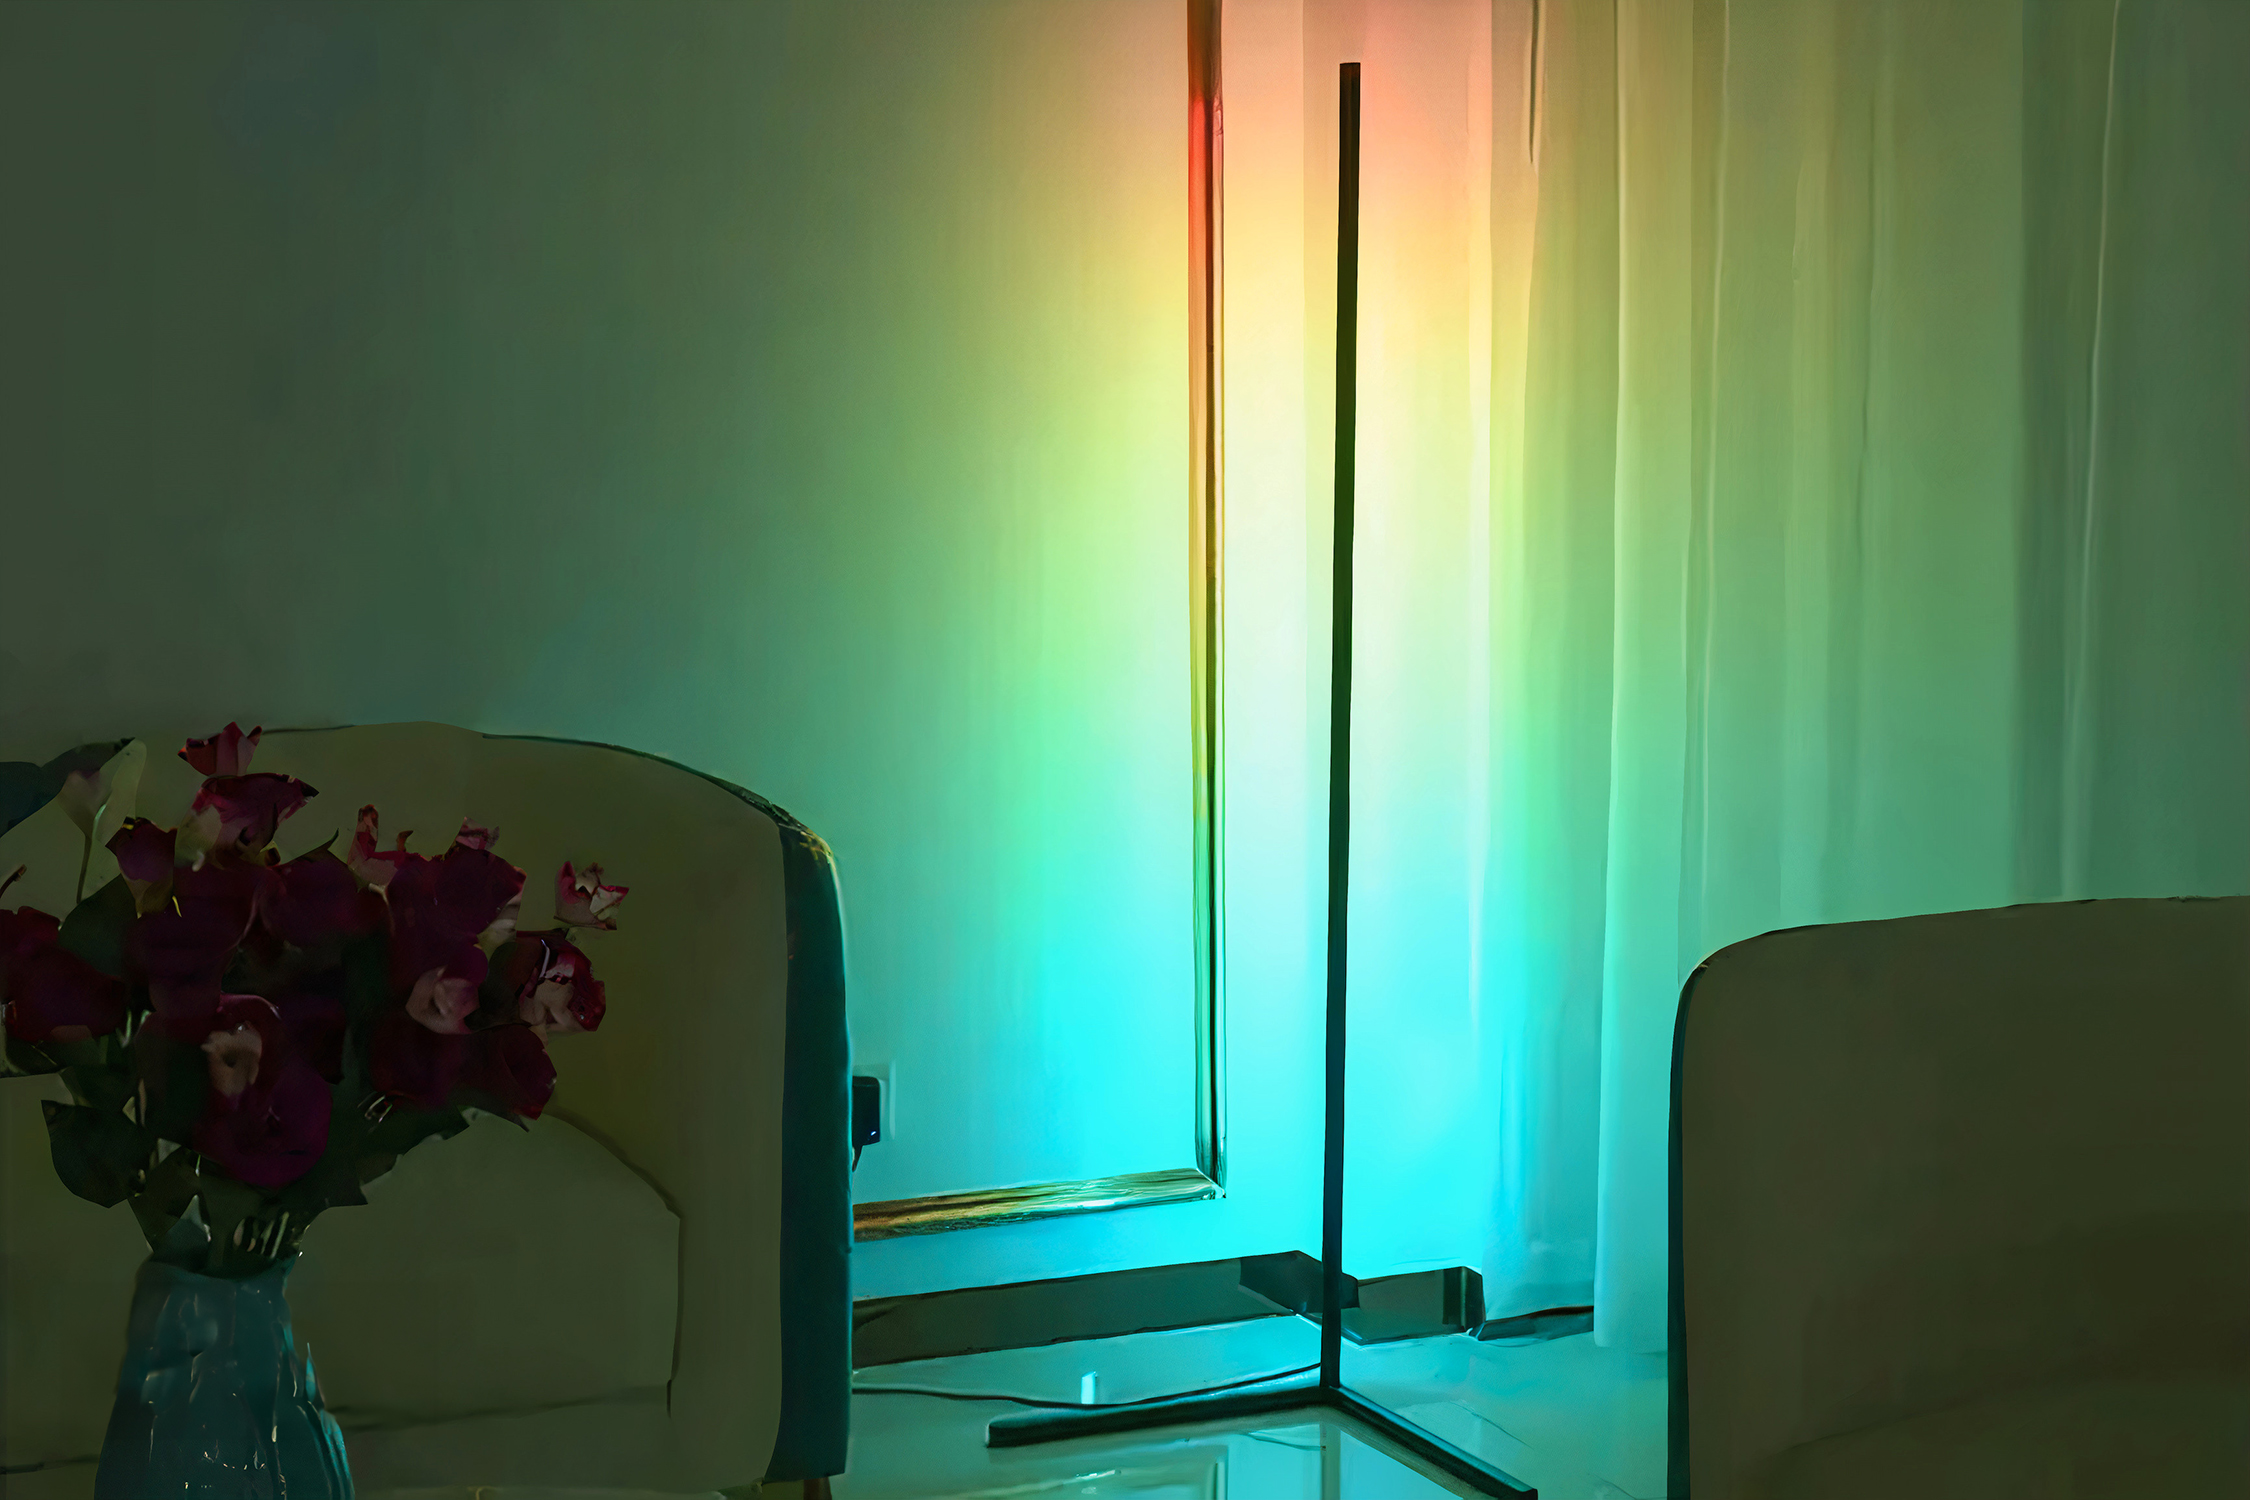 This minimalist app-controlled lamp has 68 light modes and is now $59.99